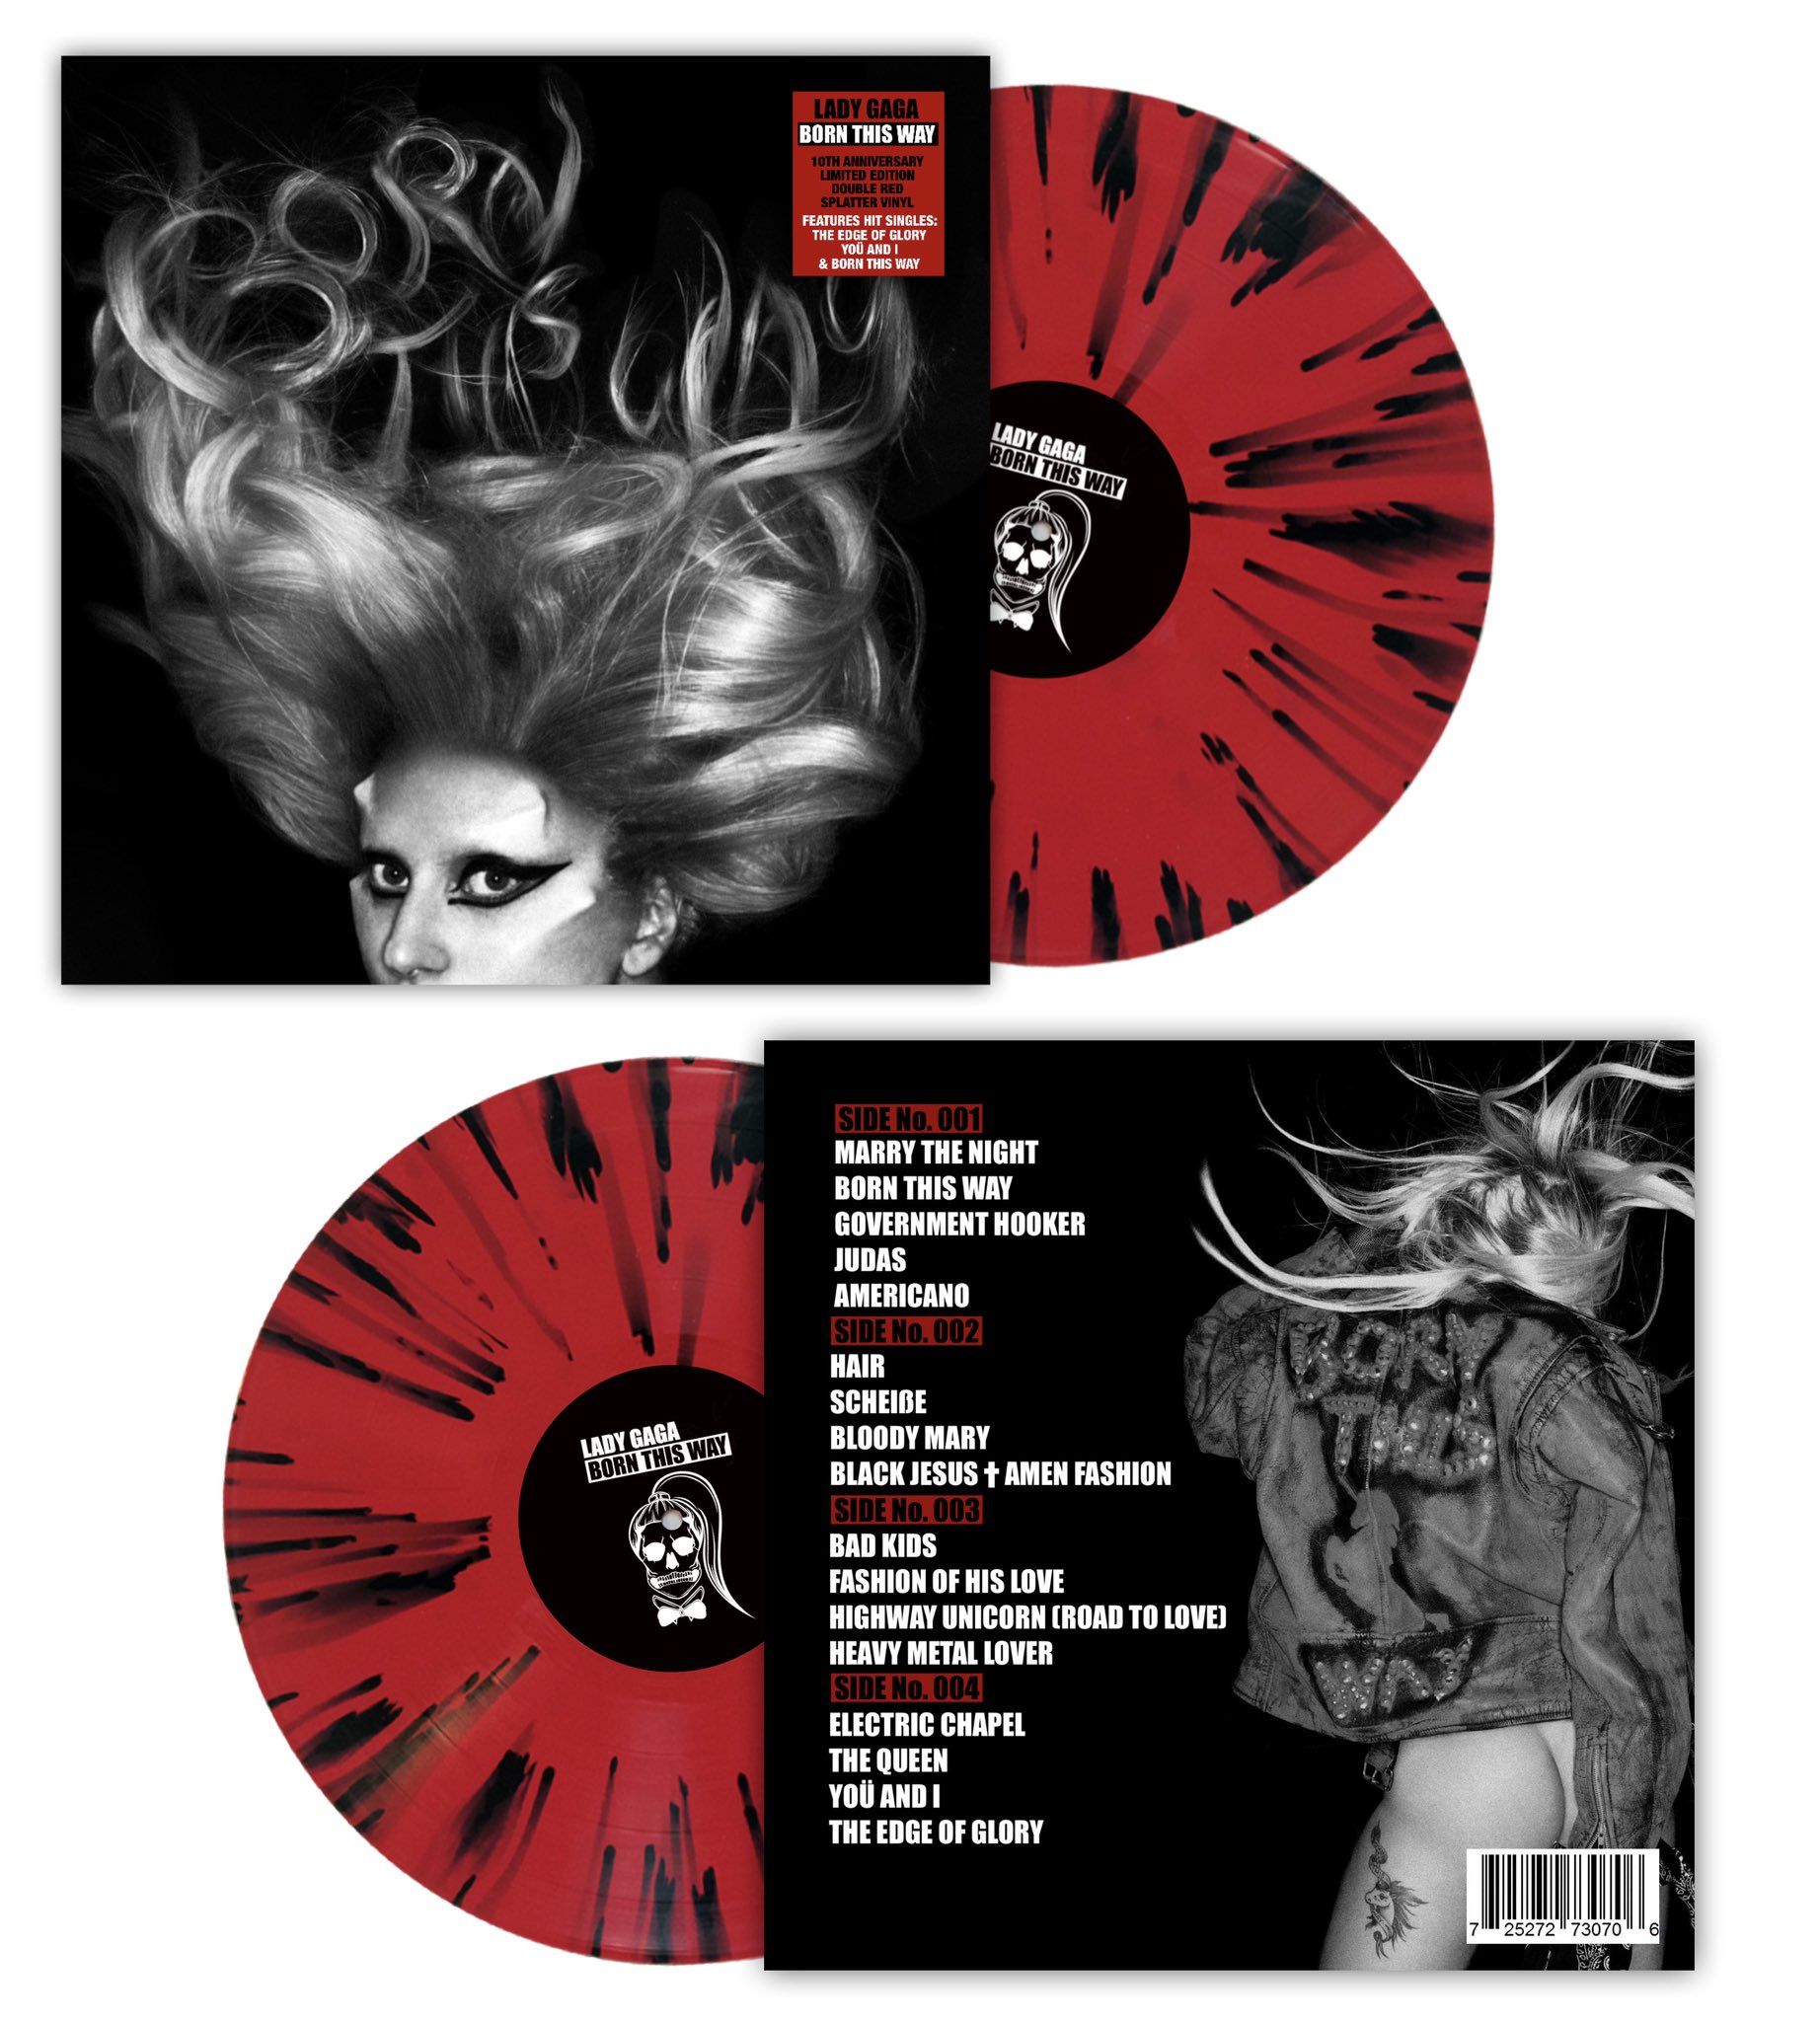 Lady Gaga Fanmade Covers: Born This Way - 10th Anniversary Limited Edition  Box Set